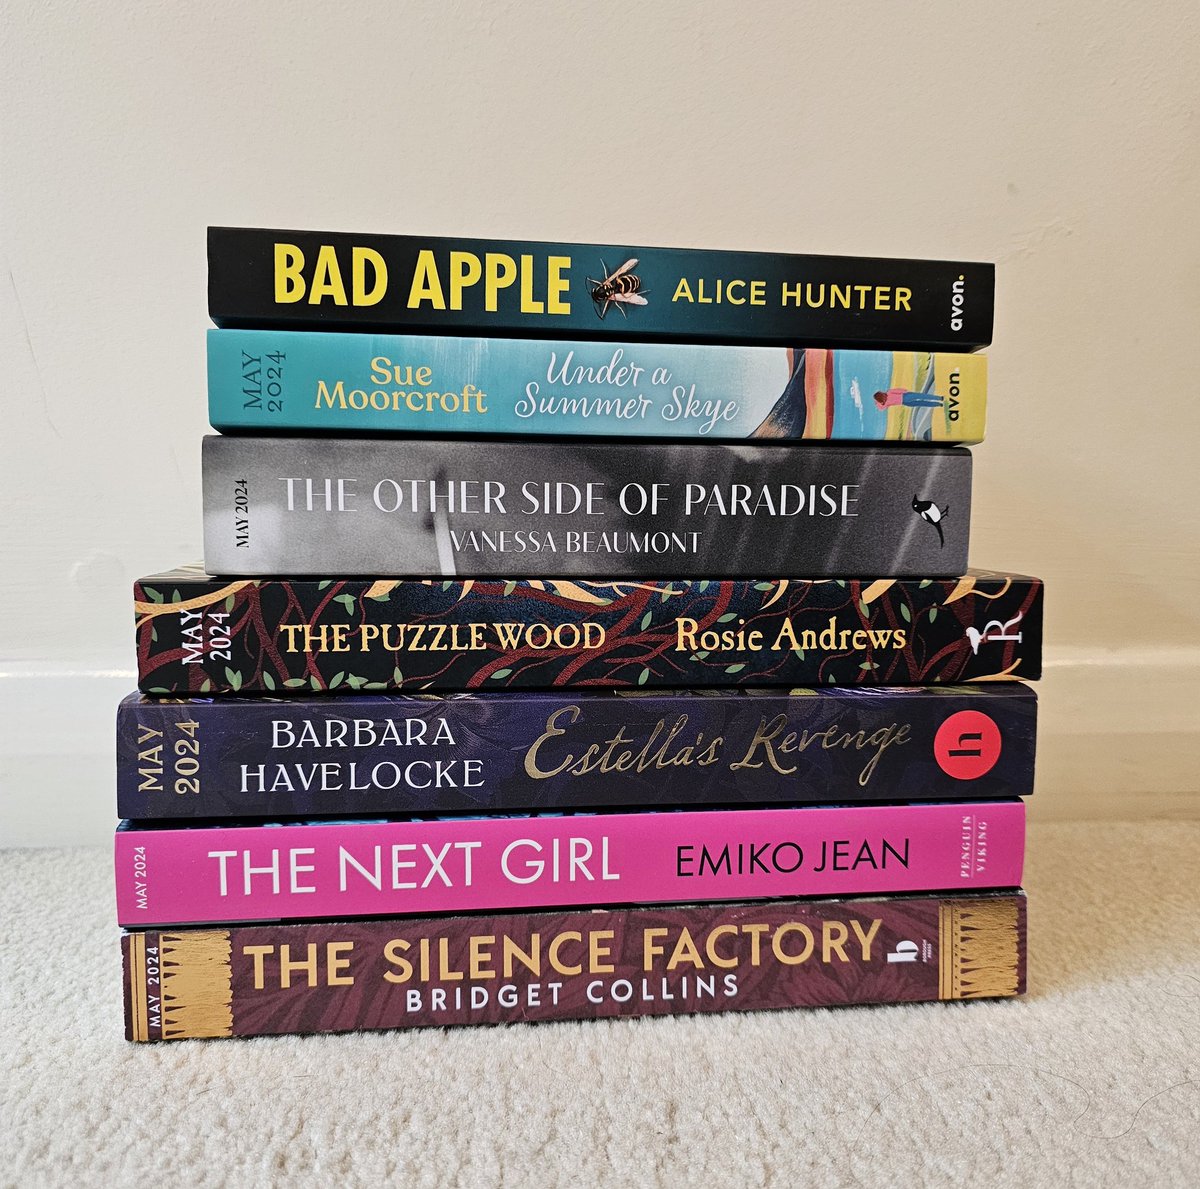 Happy Publication Day to all of these gorgeous books!